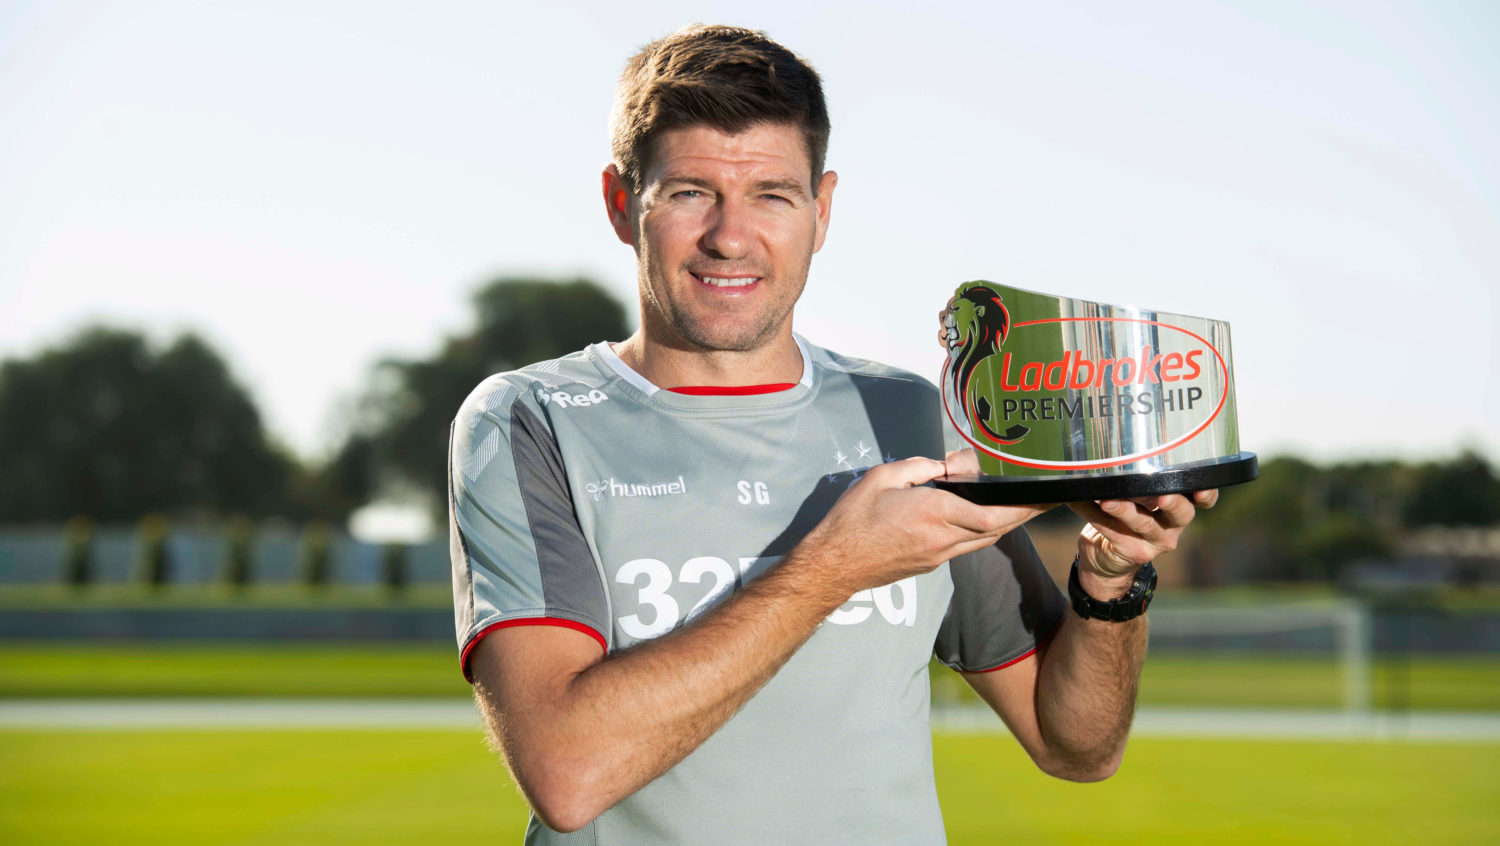 Rangers boss Gerrard wins manager of the month prize